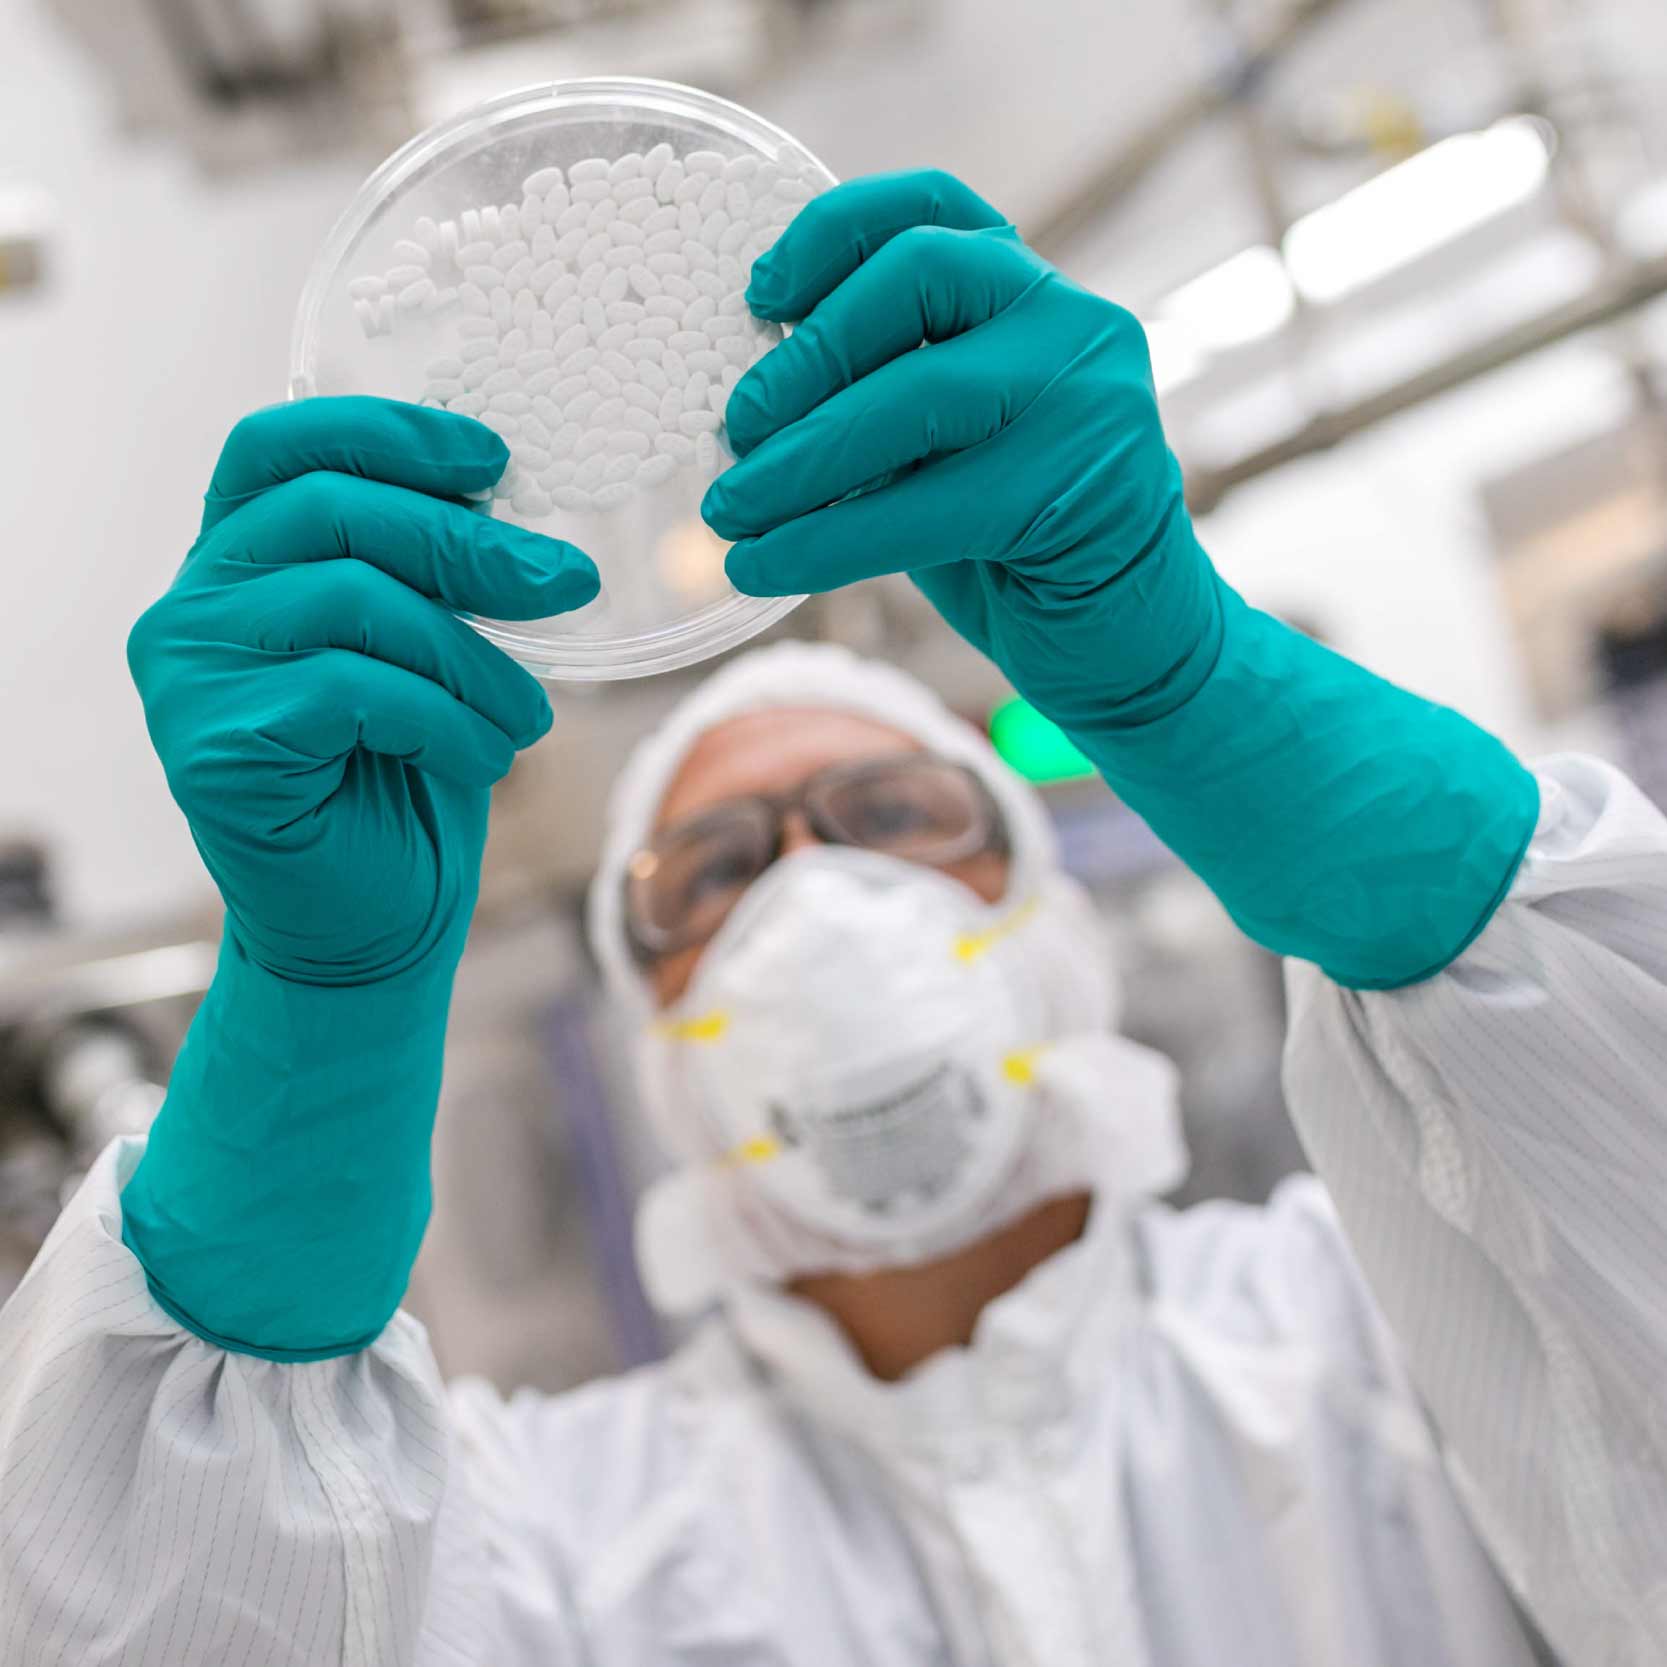 Bristol Myers Squibb strengthens cell therapy capabilities by adding new U.S. manufacturing facility for viral vector production in Libertyville, Illinois. 